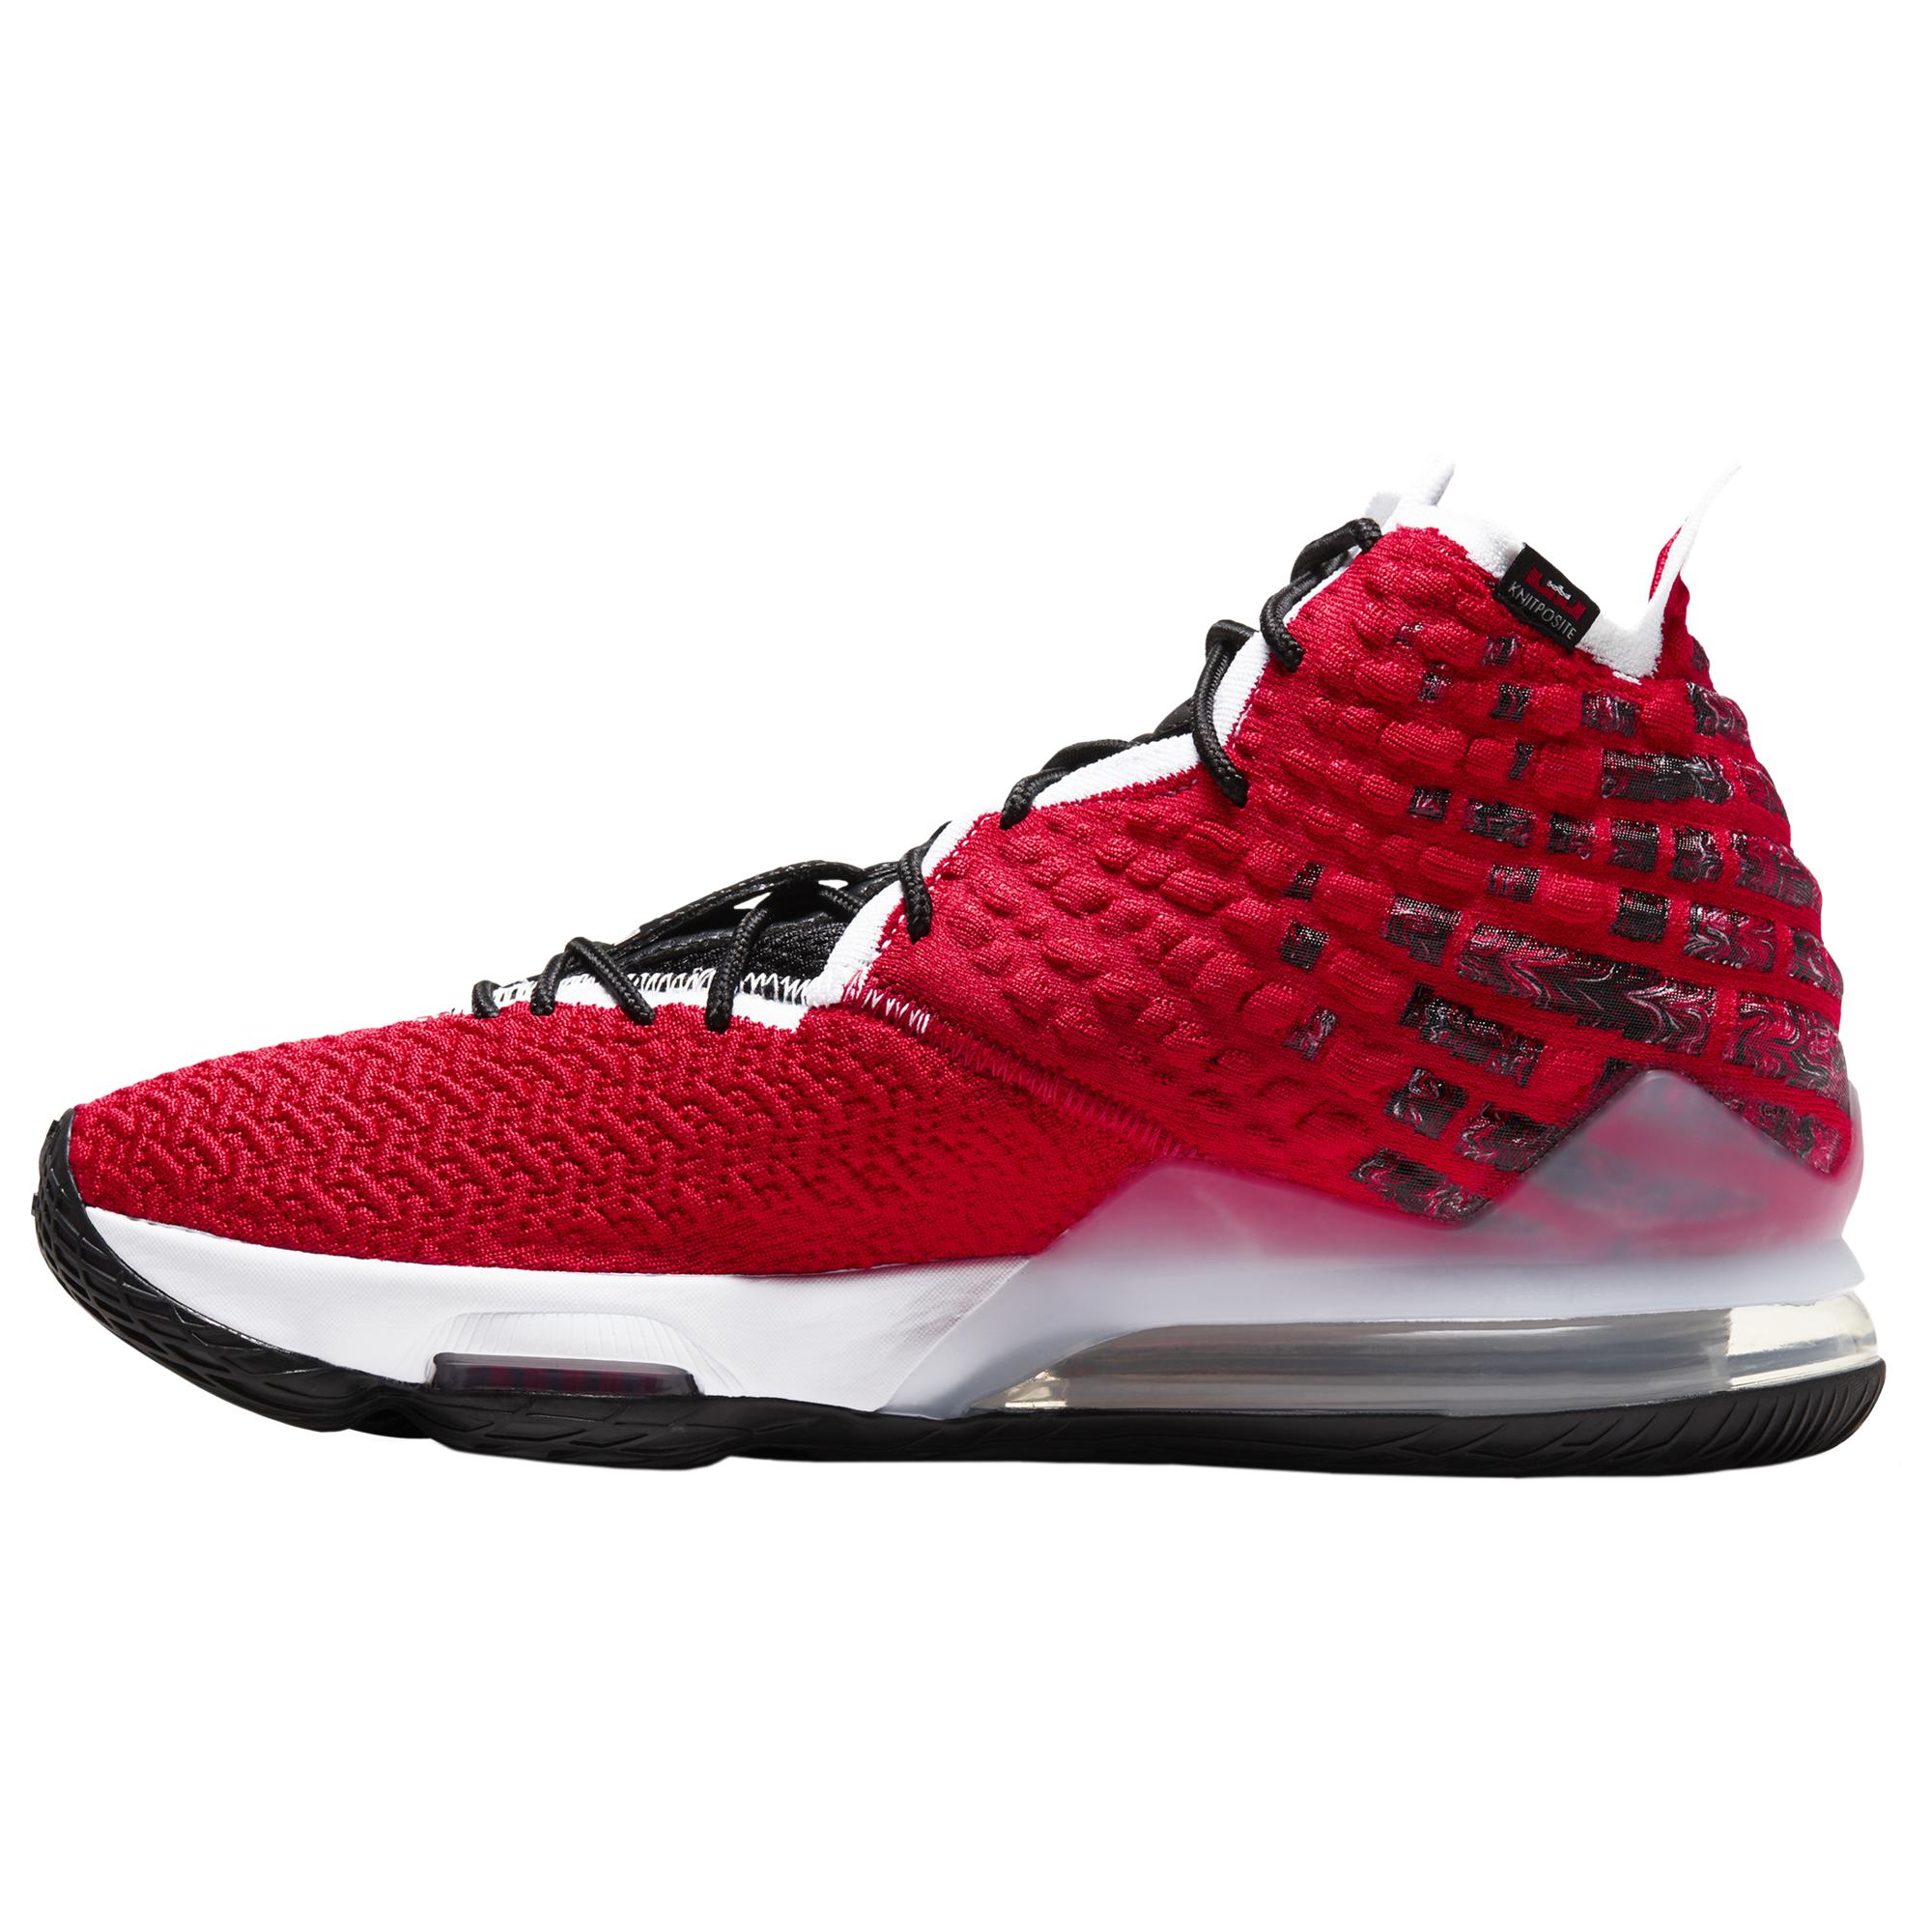 Nike Rubber Lebron 17 Basketball Shoes in University Red/White/Black ...